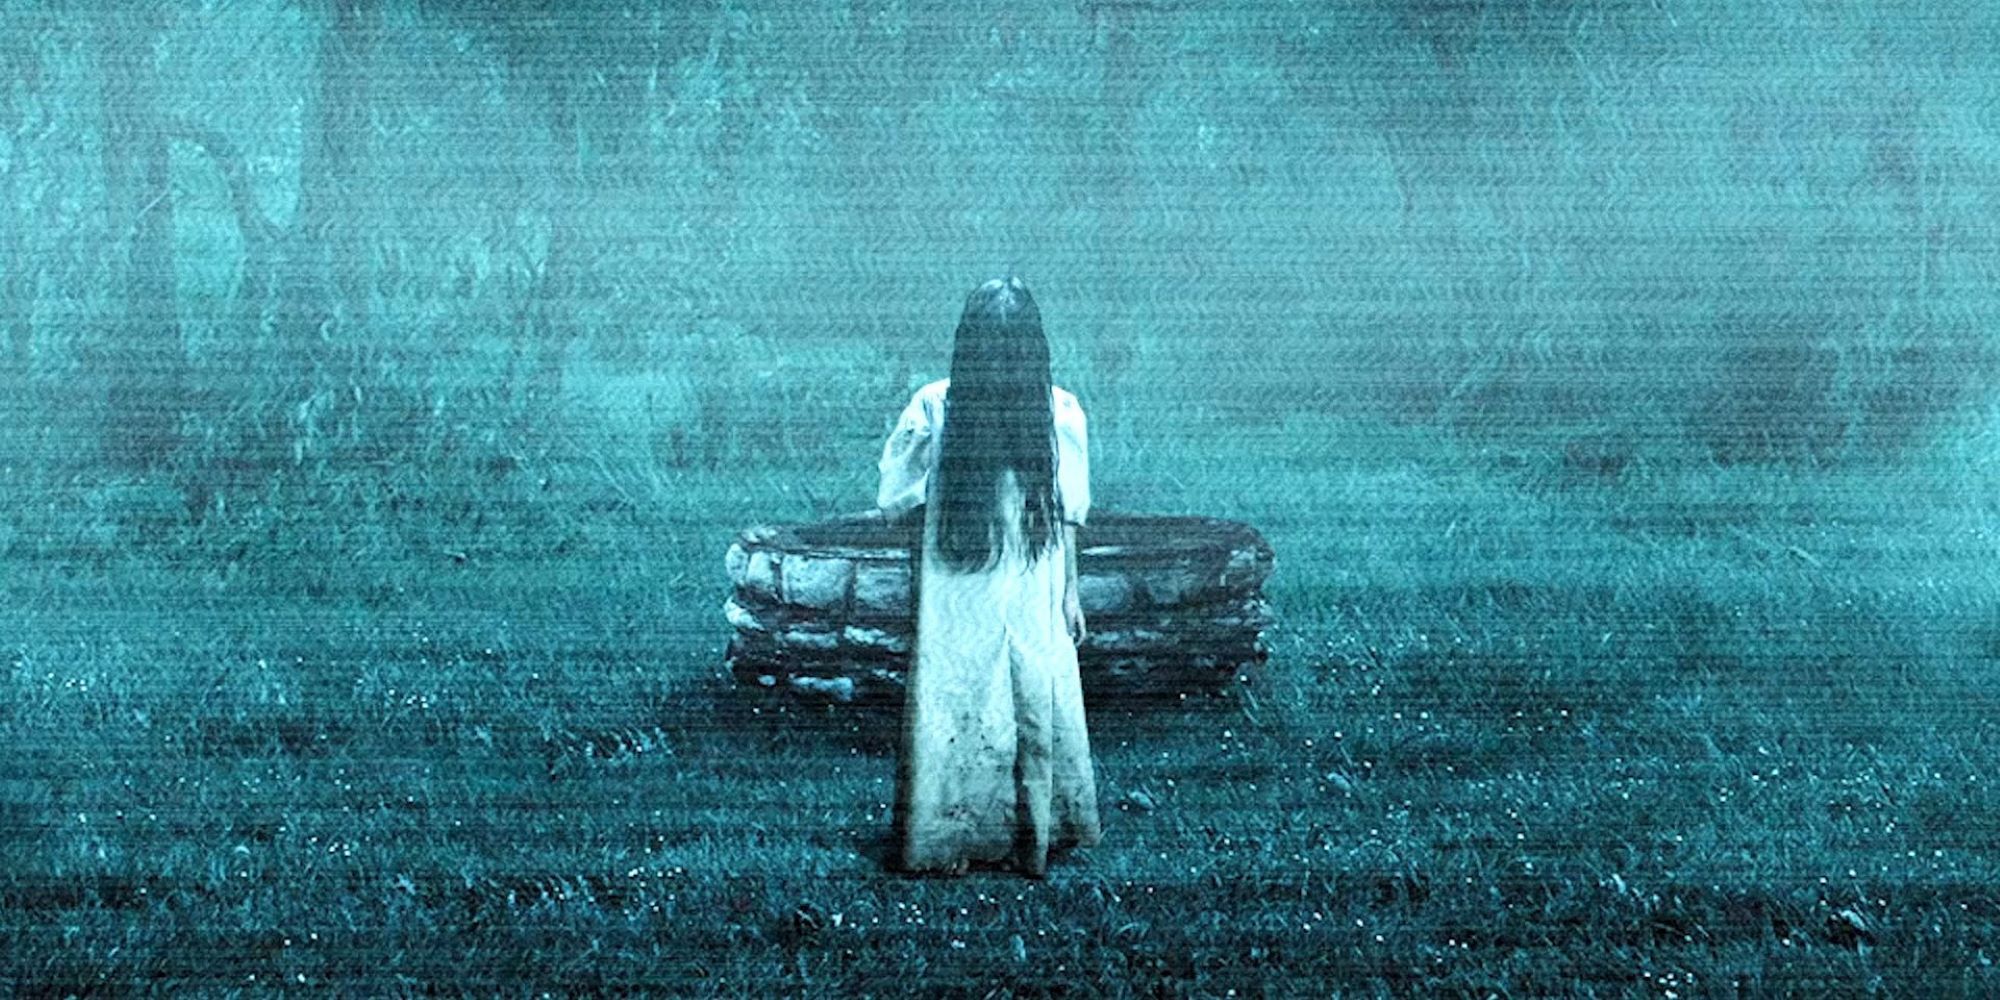 A screenshot of the movie The Ring (2002), featuring a grainy video feed of a girl with an obscured face walking towards the camera in front of a well.